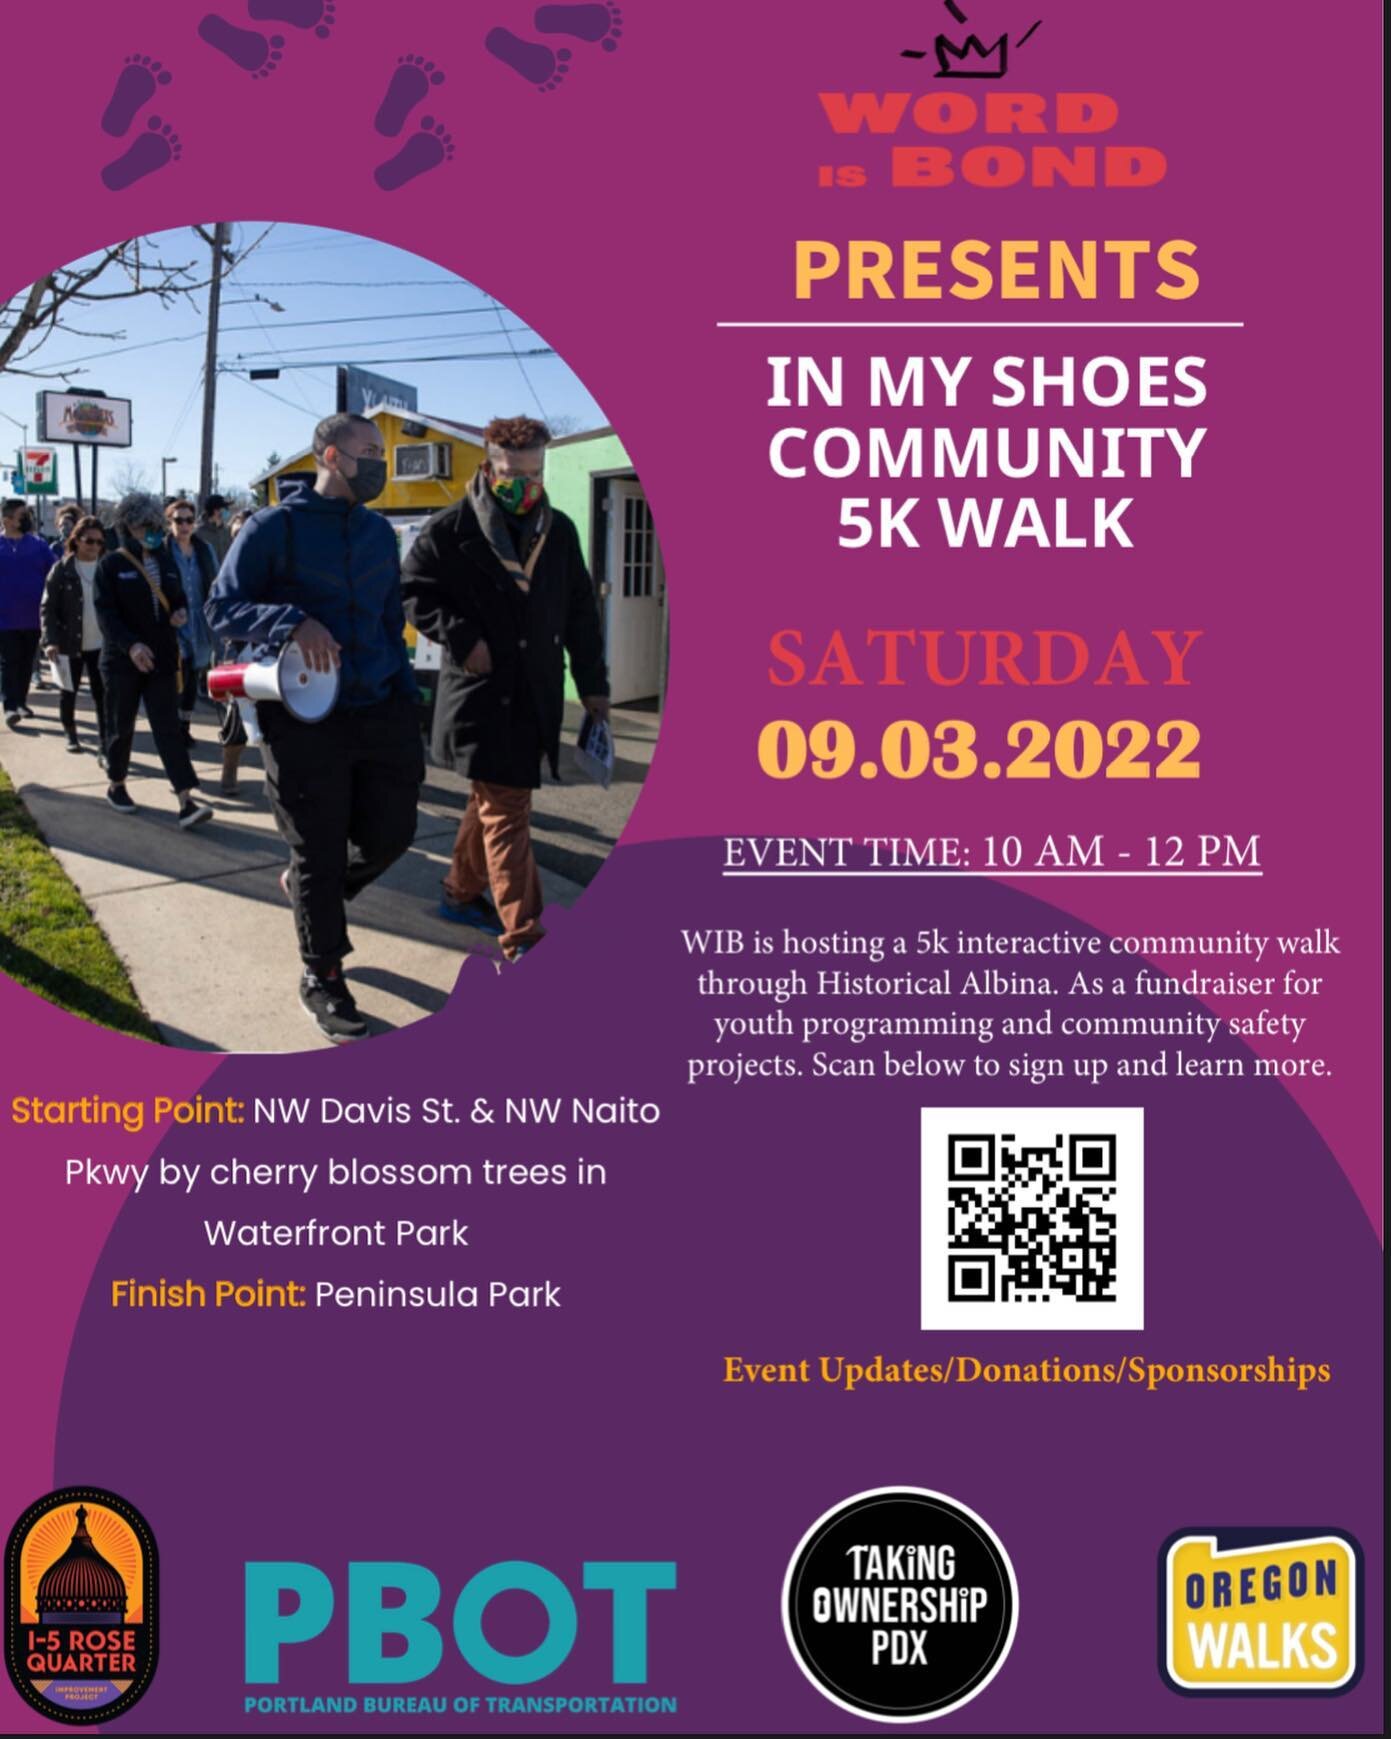 This Saturday we are sponsoring a 5k walk through the Albina neighborhood. @wordisbondpdx presents &ldquo;In My Shoes&rdquo; a walk to promote Black stories, health and wellness, and future Albina that includes Black excellence!

Register for the wal